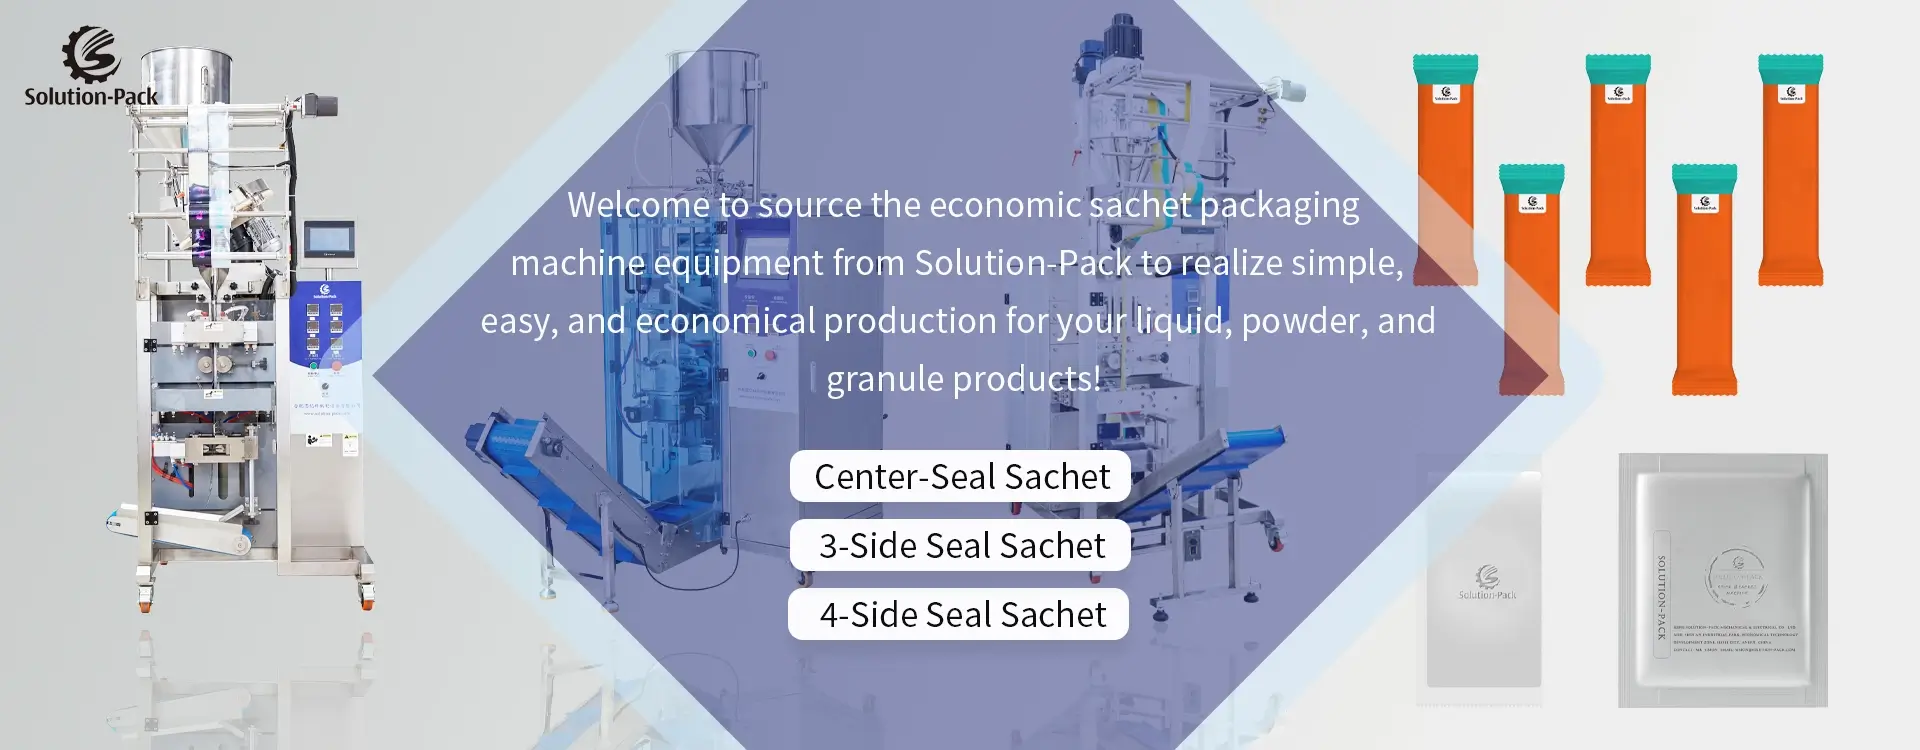 Automatic Premium Sachet Packaging Machine Equipment Middle Banner Picture | Solution-Pack